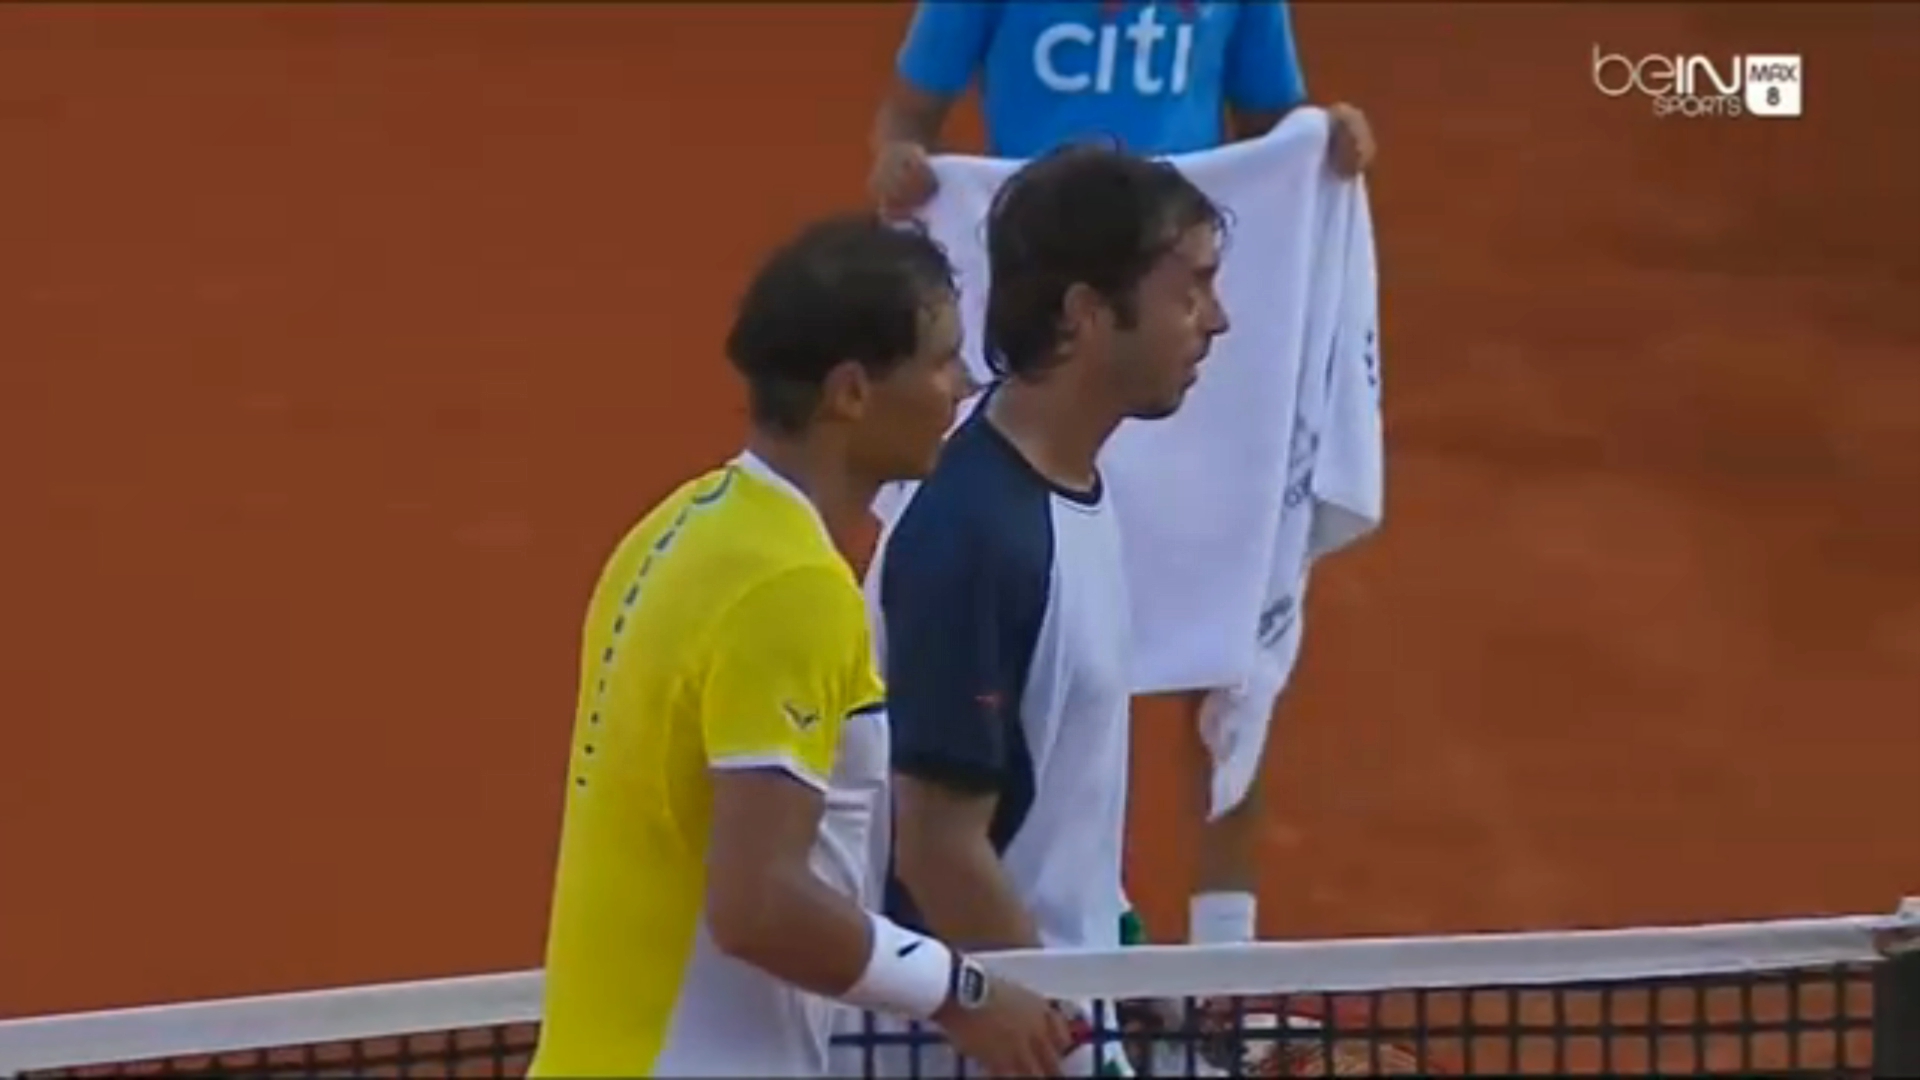 Nadal vs Lorenzi, Buenos Aires Open 2016 (1/4 Finale), highlights SD - Argentina Open QF - 12/02/16 